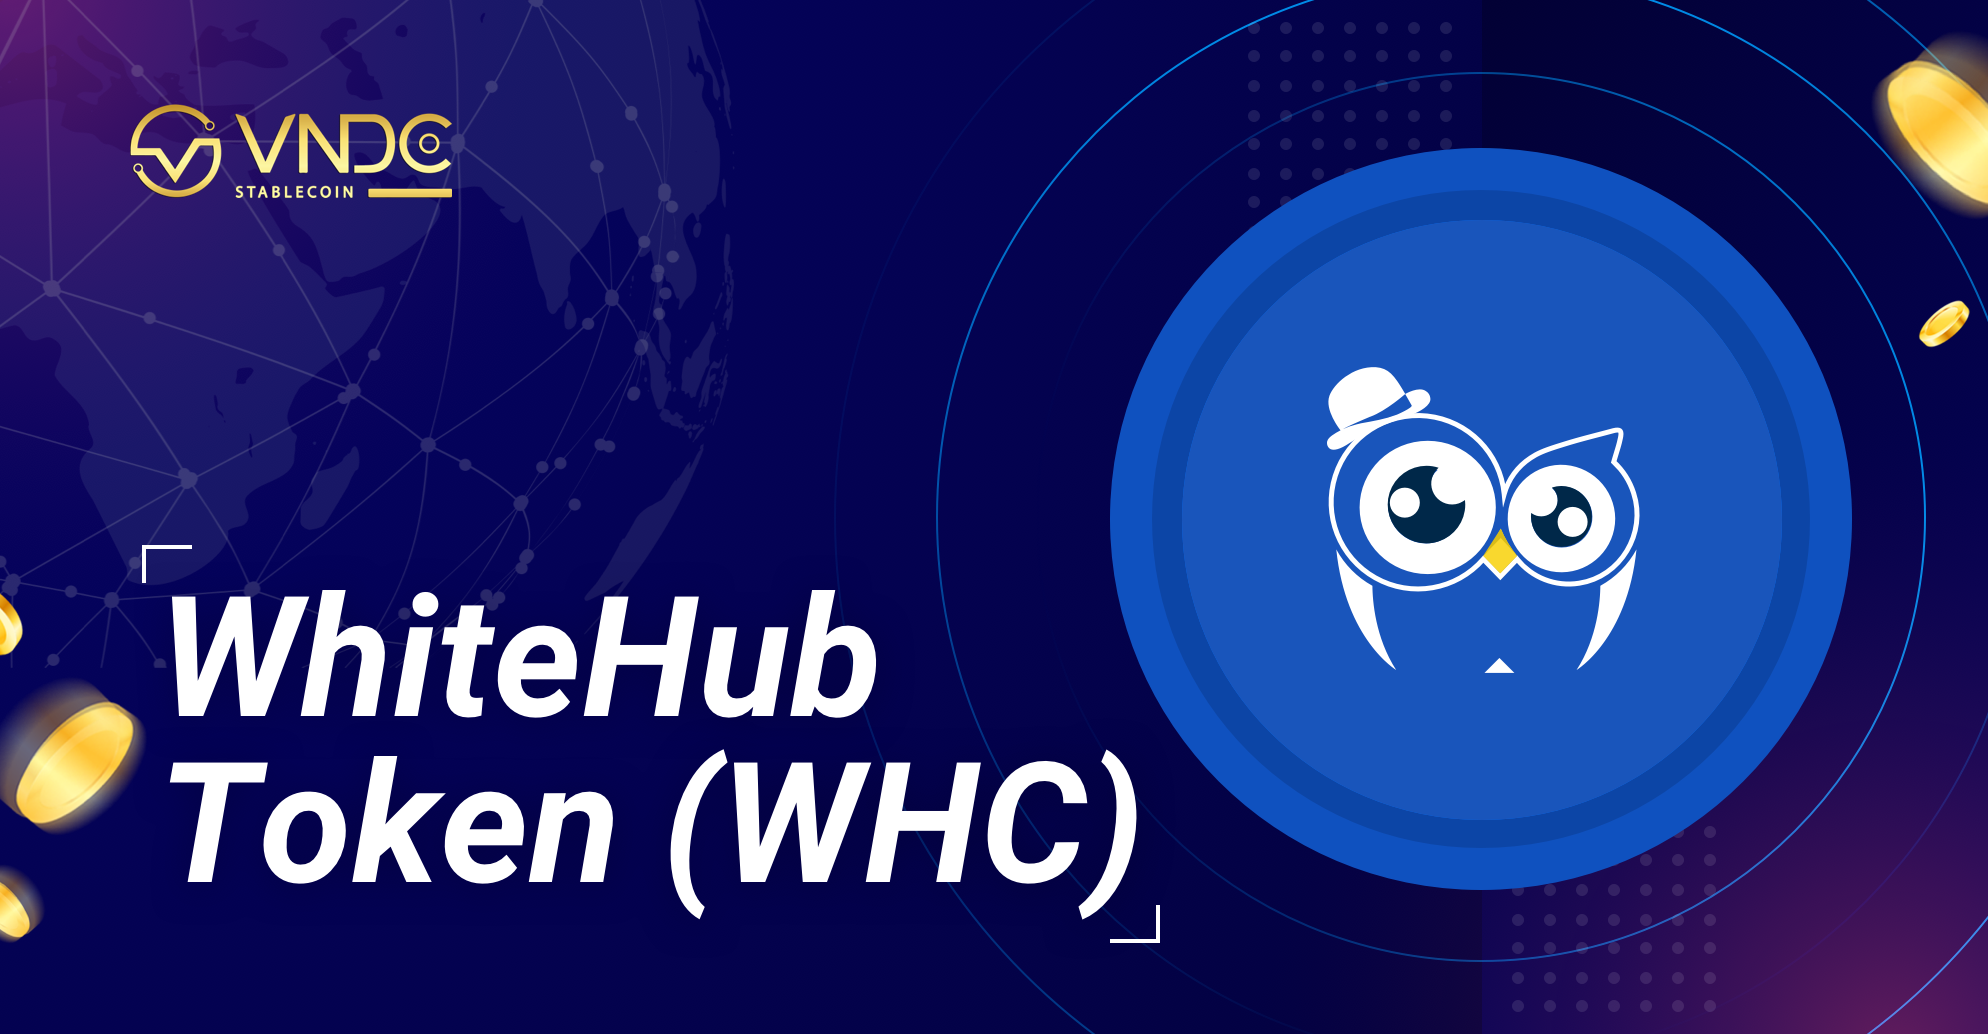 Research Article about WhiteHub Token (WHC)